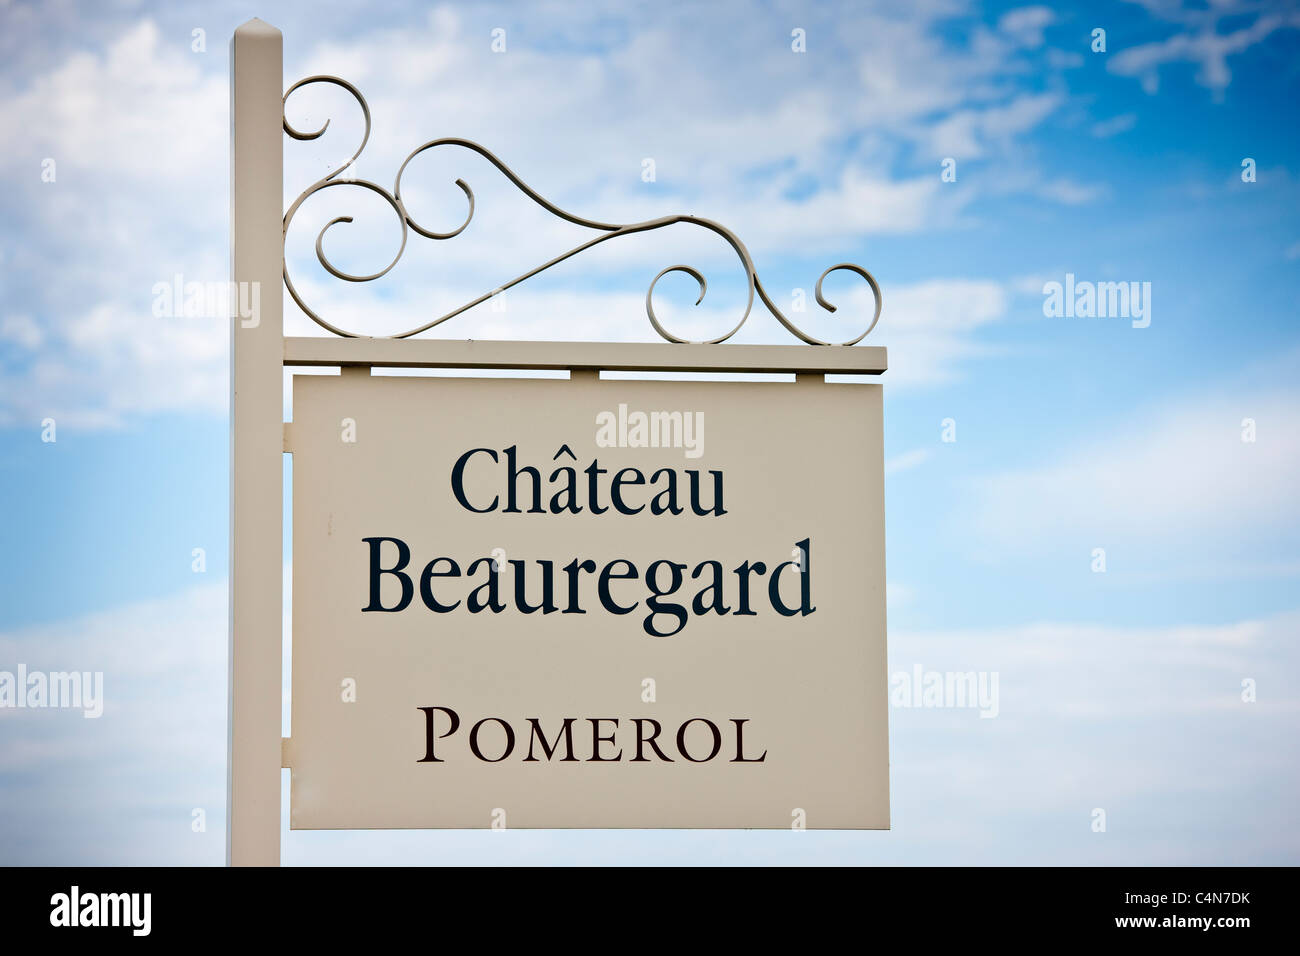 Sign for Chateau Beauregard wine estate at Pomerol in the Bordeaux region of France Stock Photo